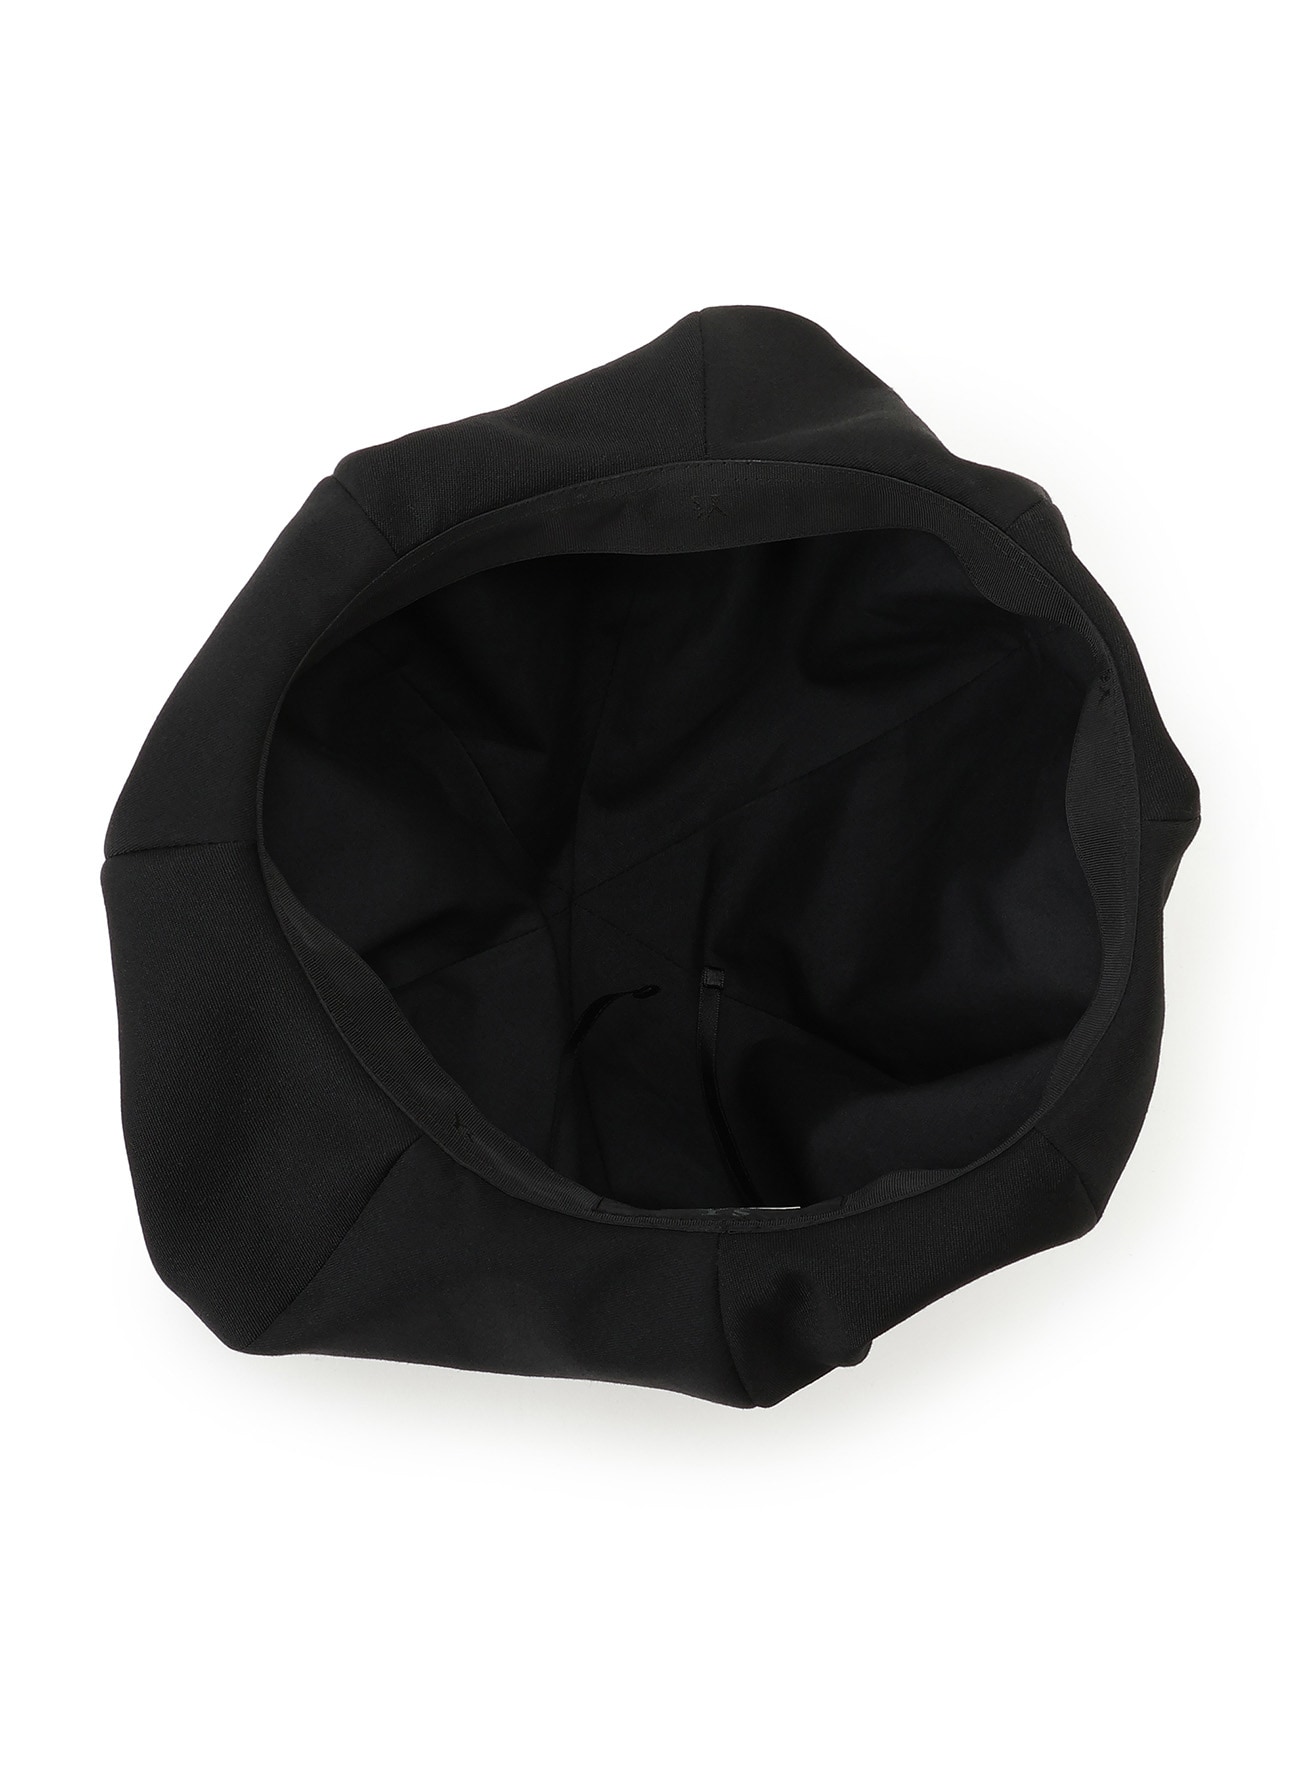 WOOL GABARDINE BERET WITH TUCKS(FREE SIZE Black): Y's｜THE SHOP 